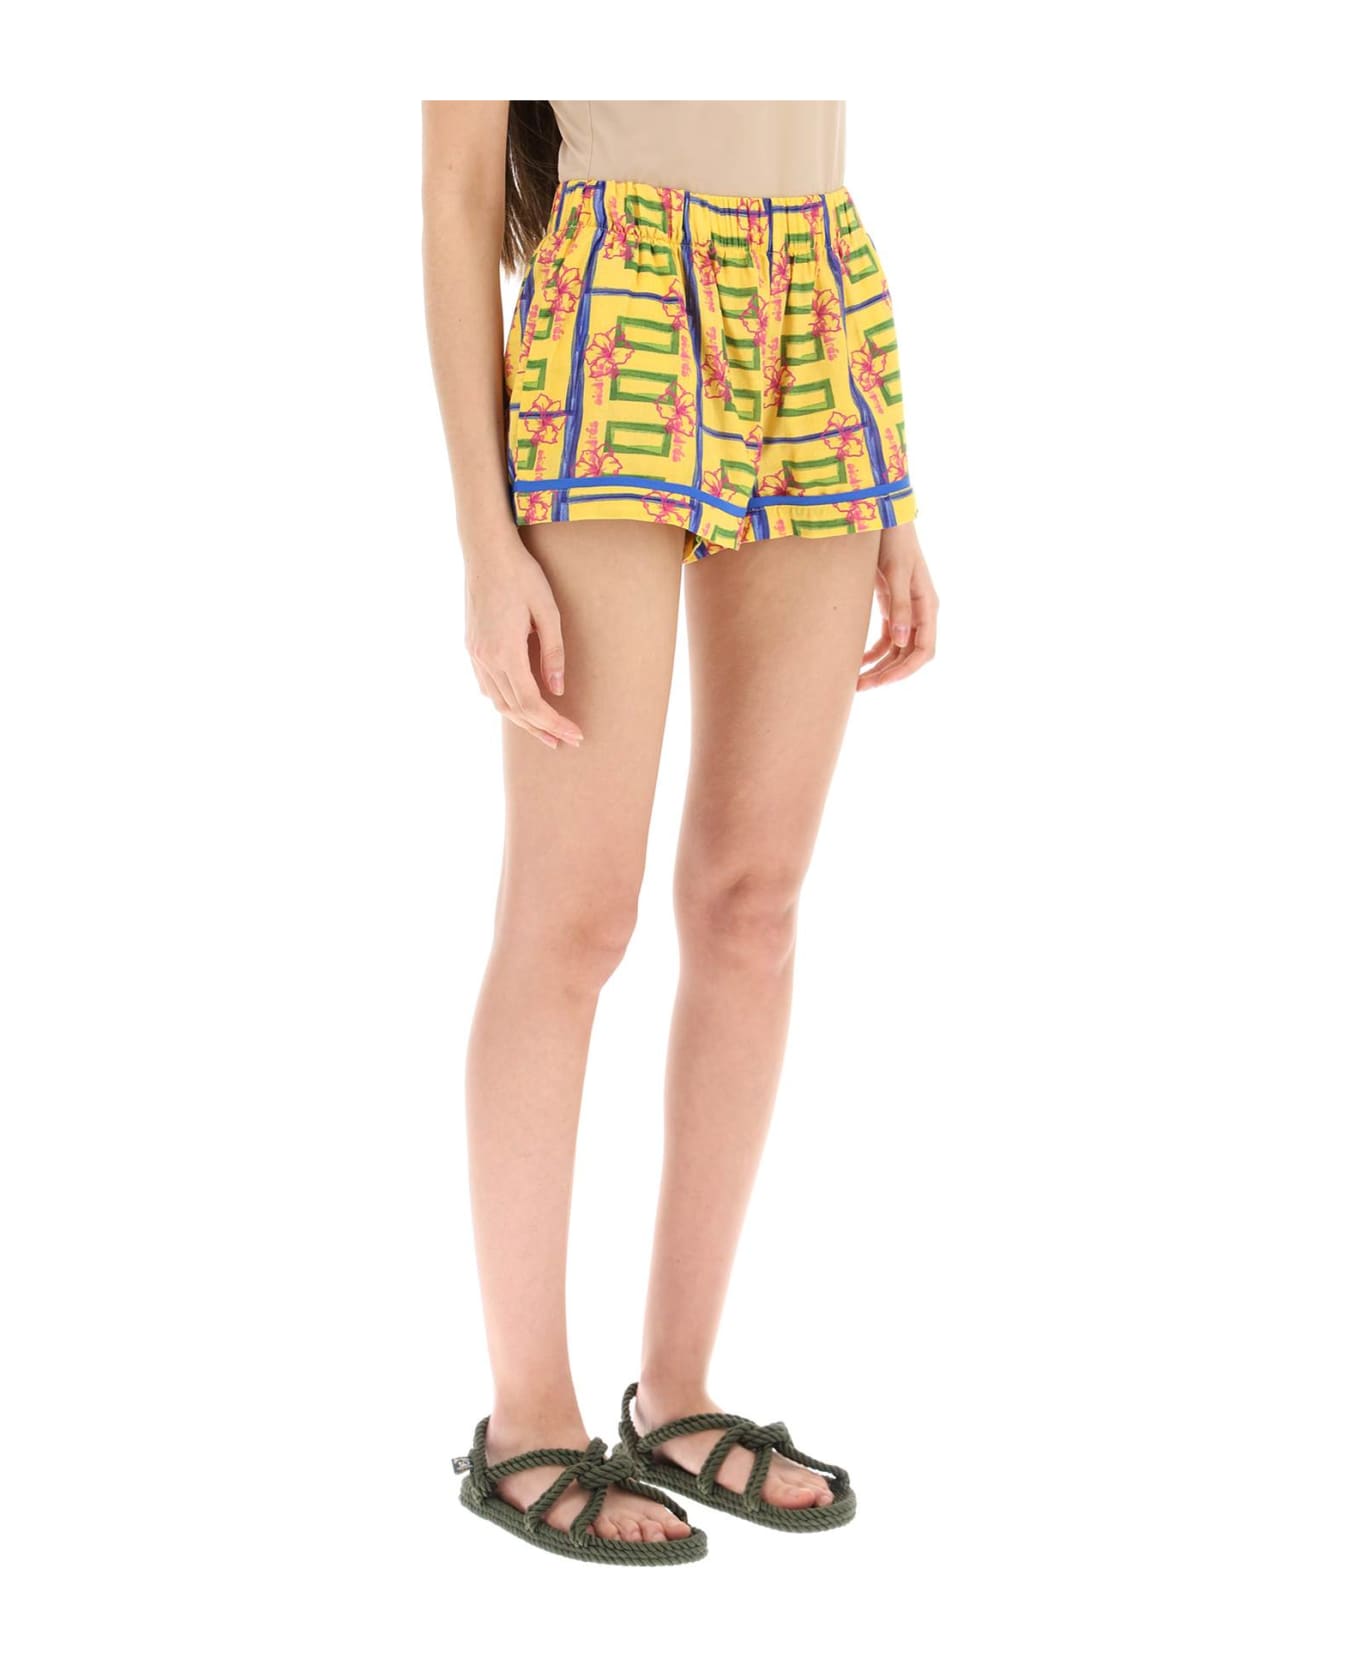 SIEDRES All-over Printed Cotton 'zyon' Shorts - MULTI (Yellow) ショートパンツ